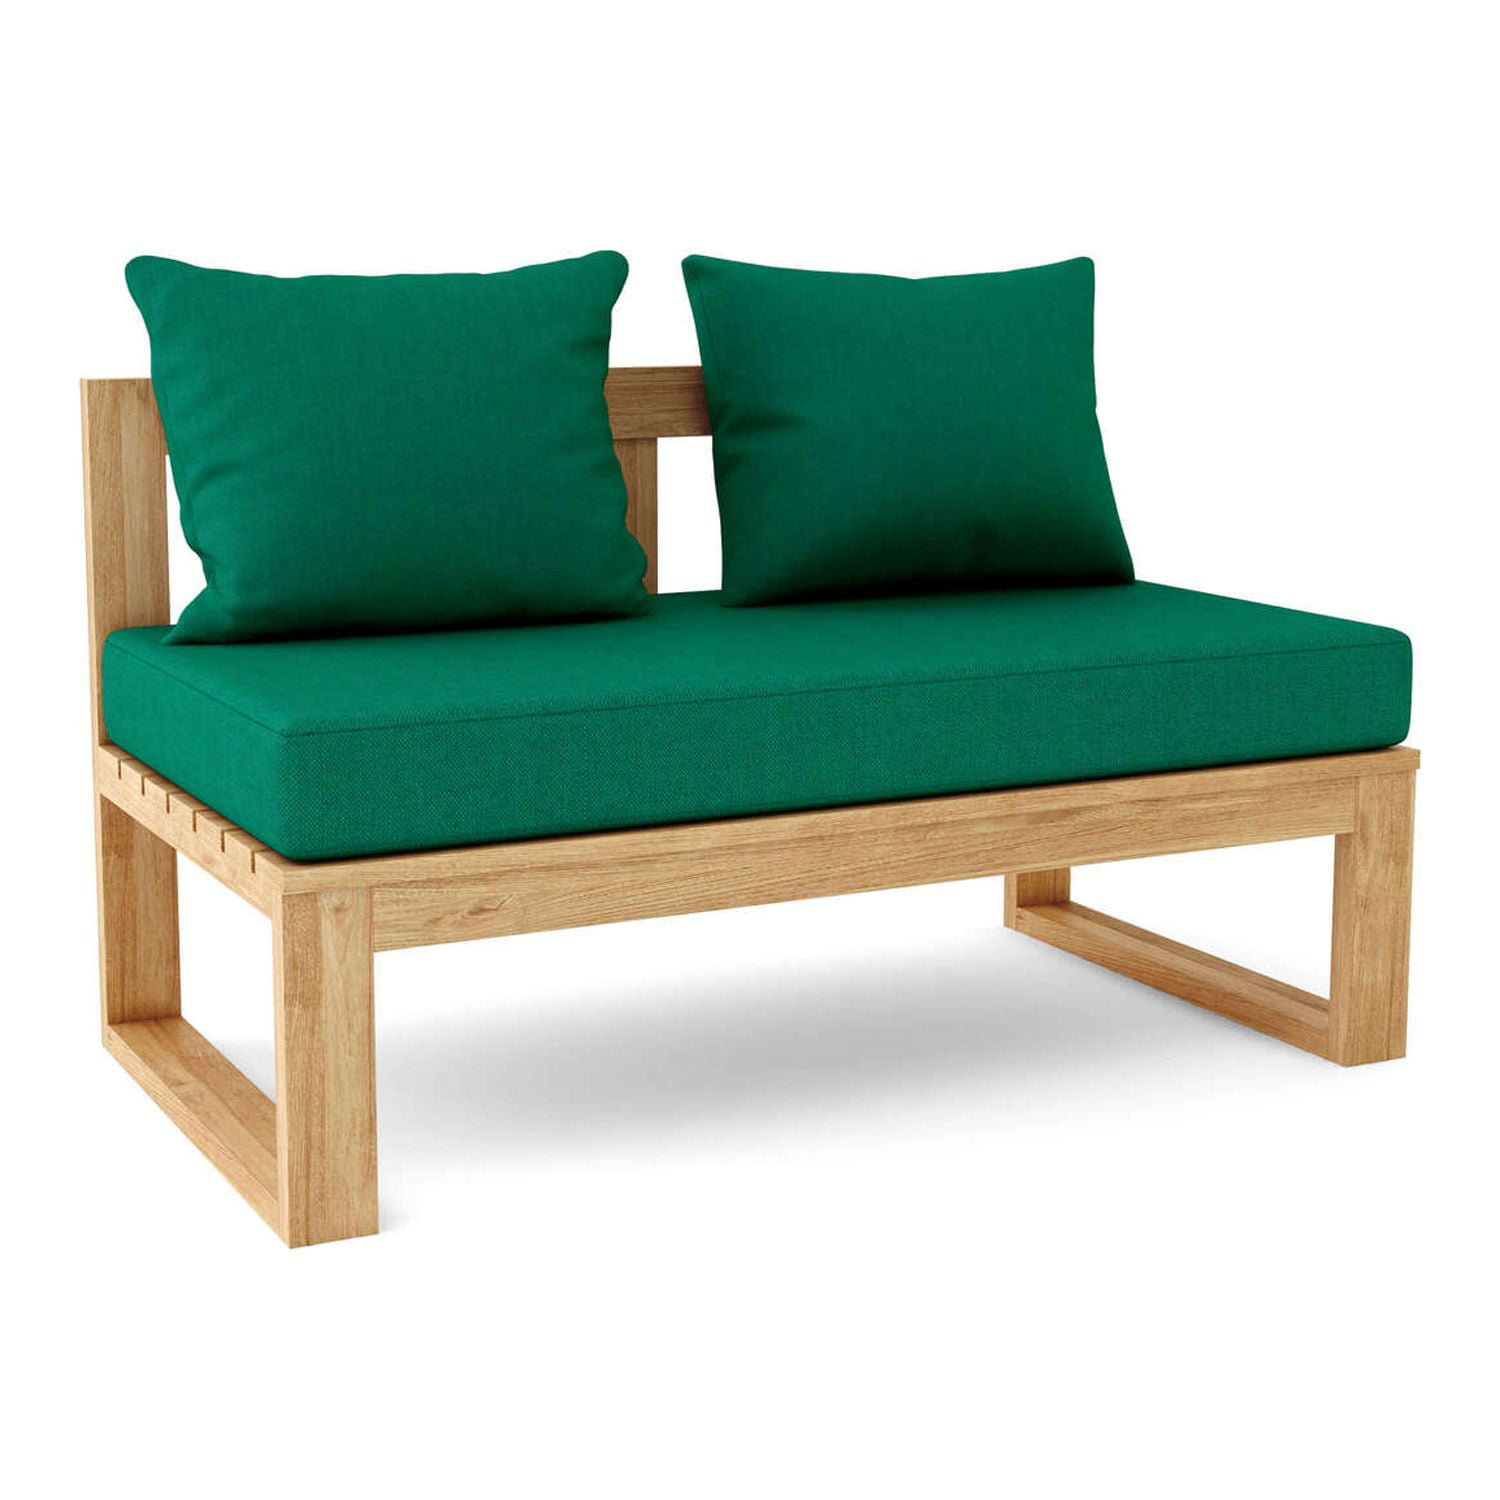 Picture of Anderson Teak BH-808S Straight Modular Deep Seating Set, Natural Smooth Well Sanded